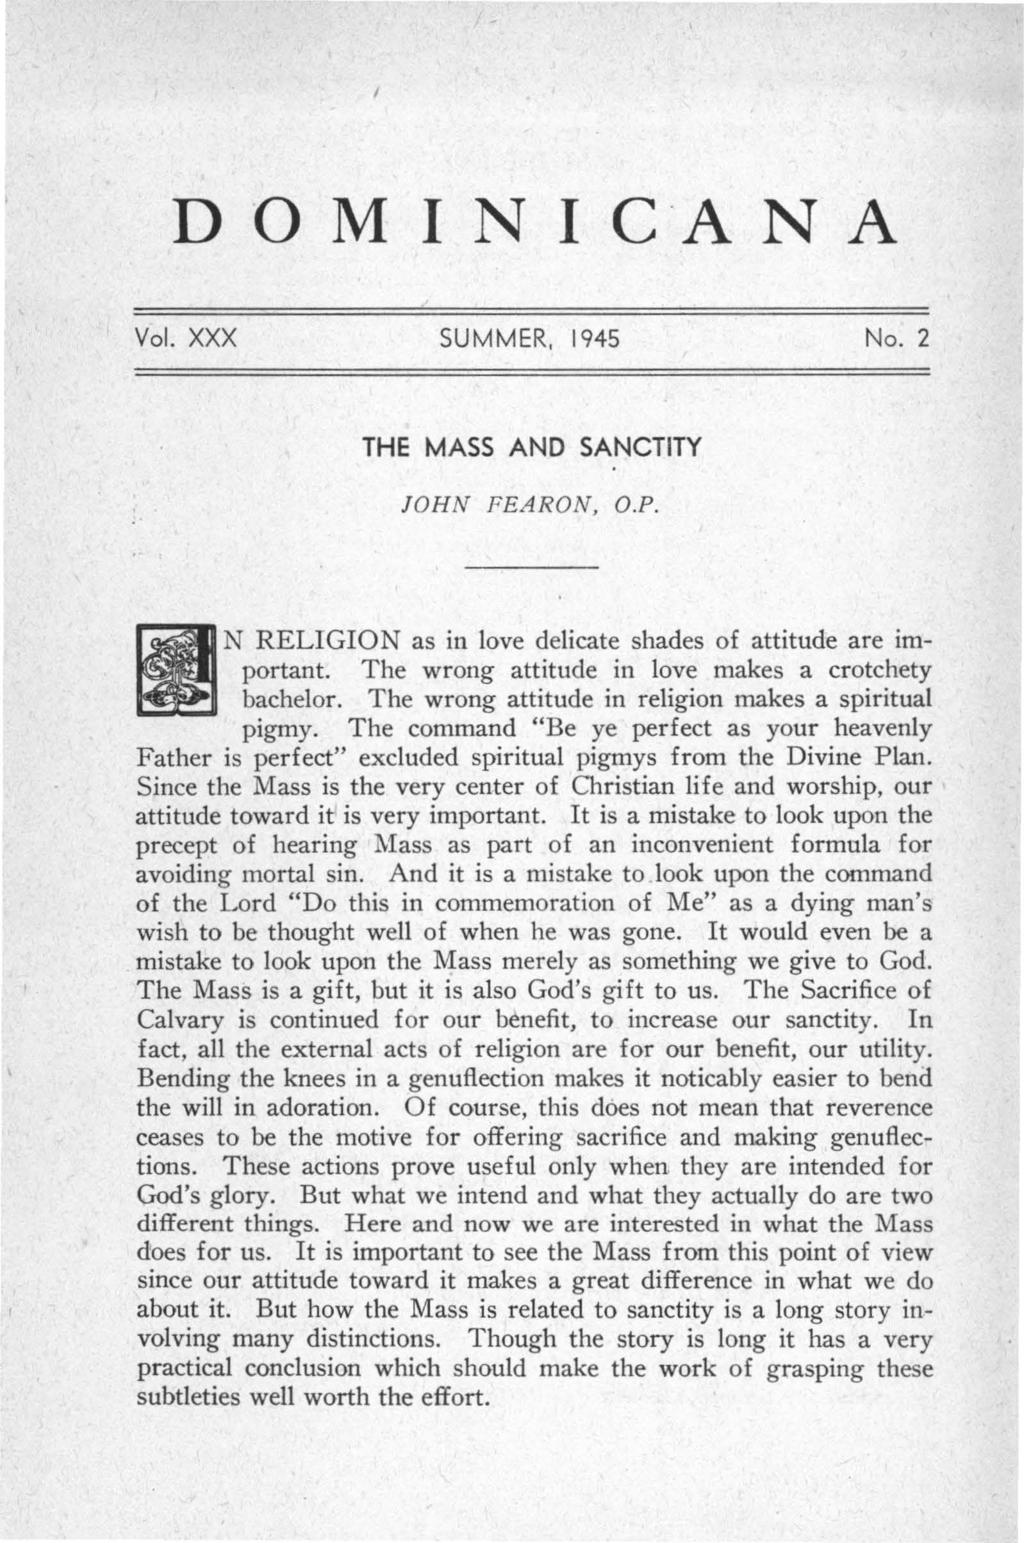 D 0 M I N I c A N A Vol. XXX SUMMER, 1945 No.2 THE MASS AND SANCTITY JOH N FEA RON, O.P. 11 N RELIGION as in love delicate shades of attitude are important.